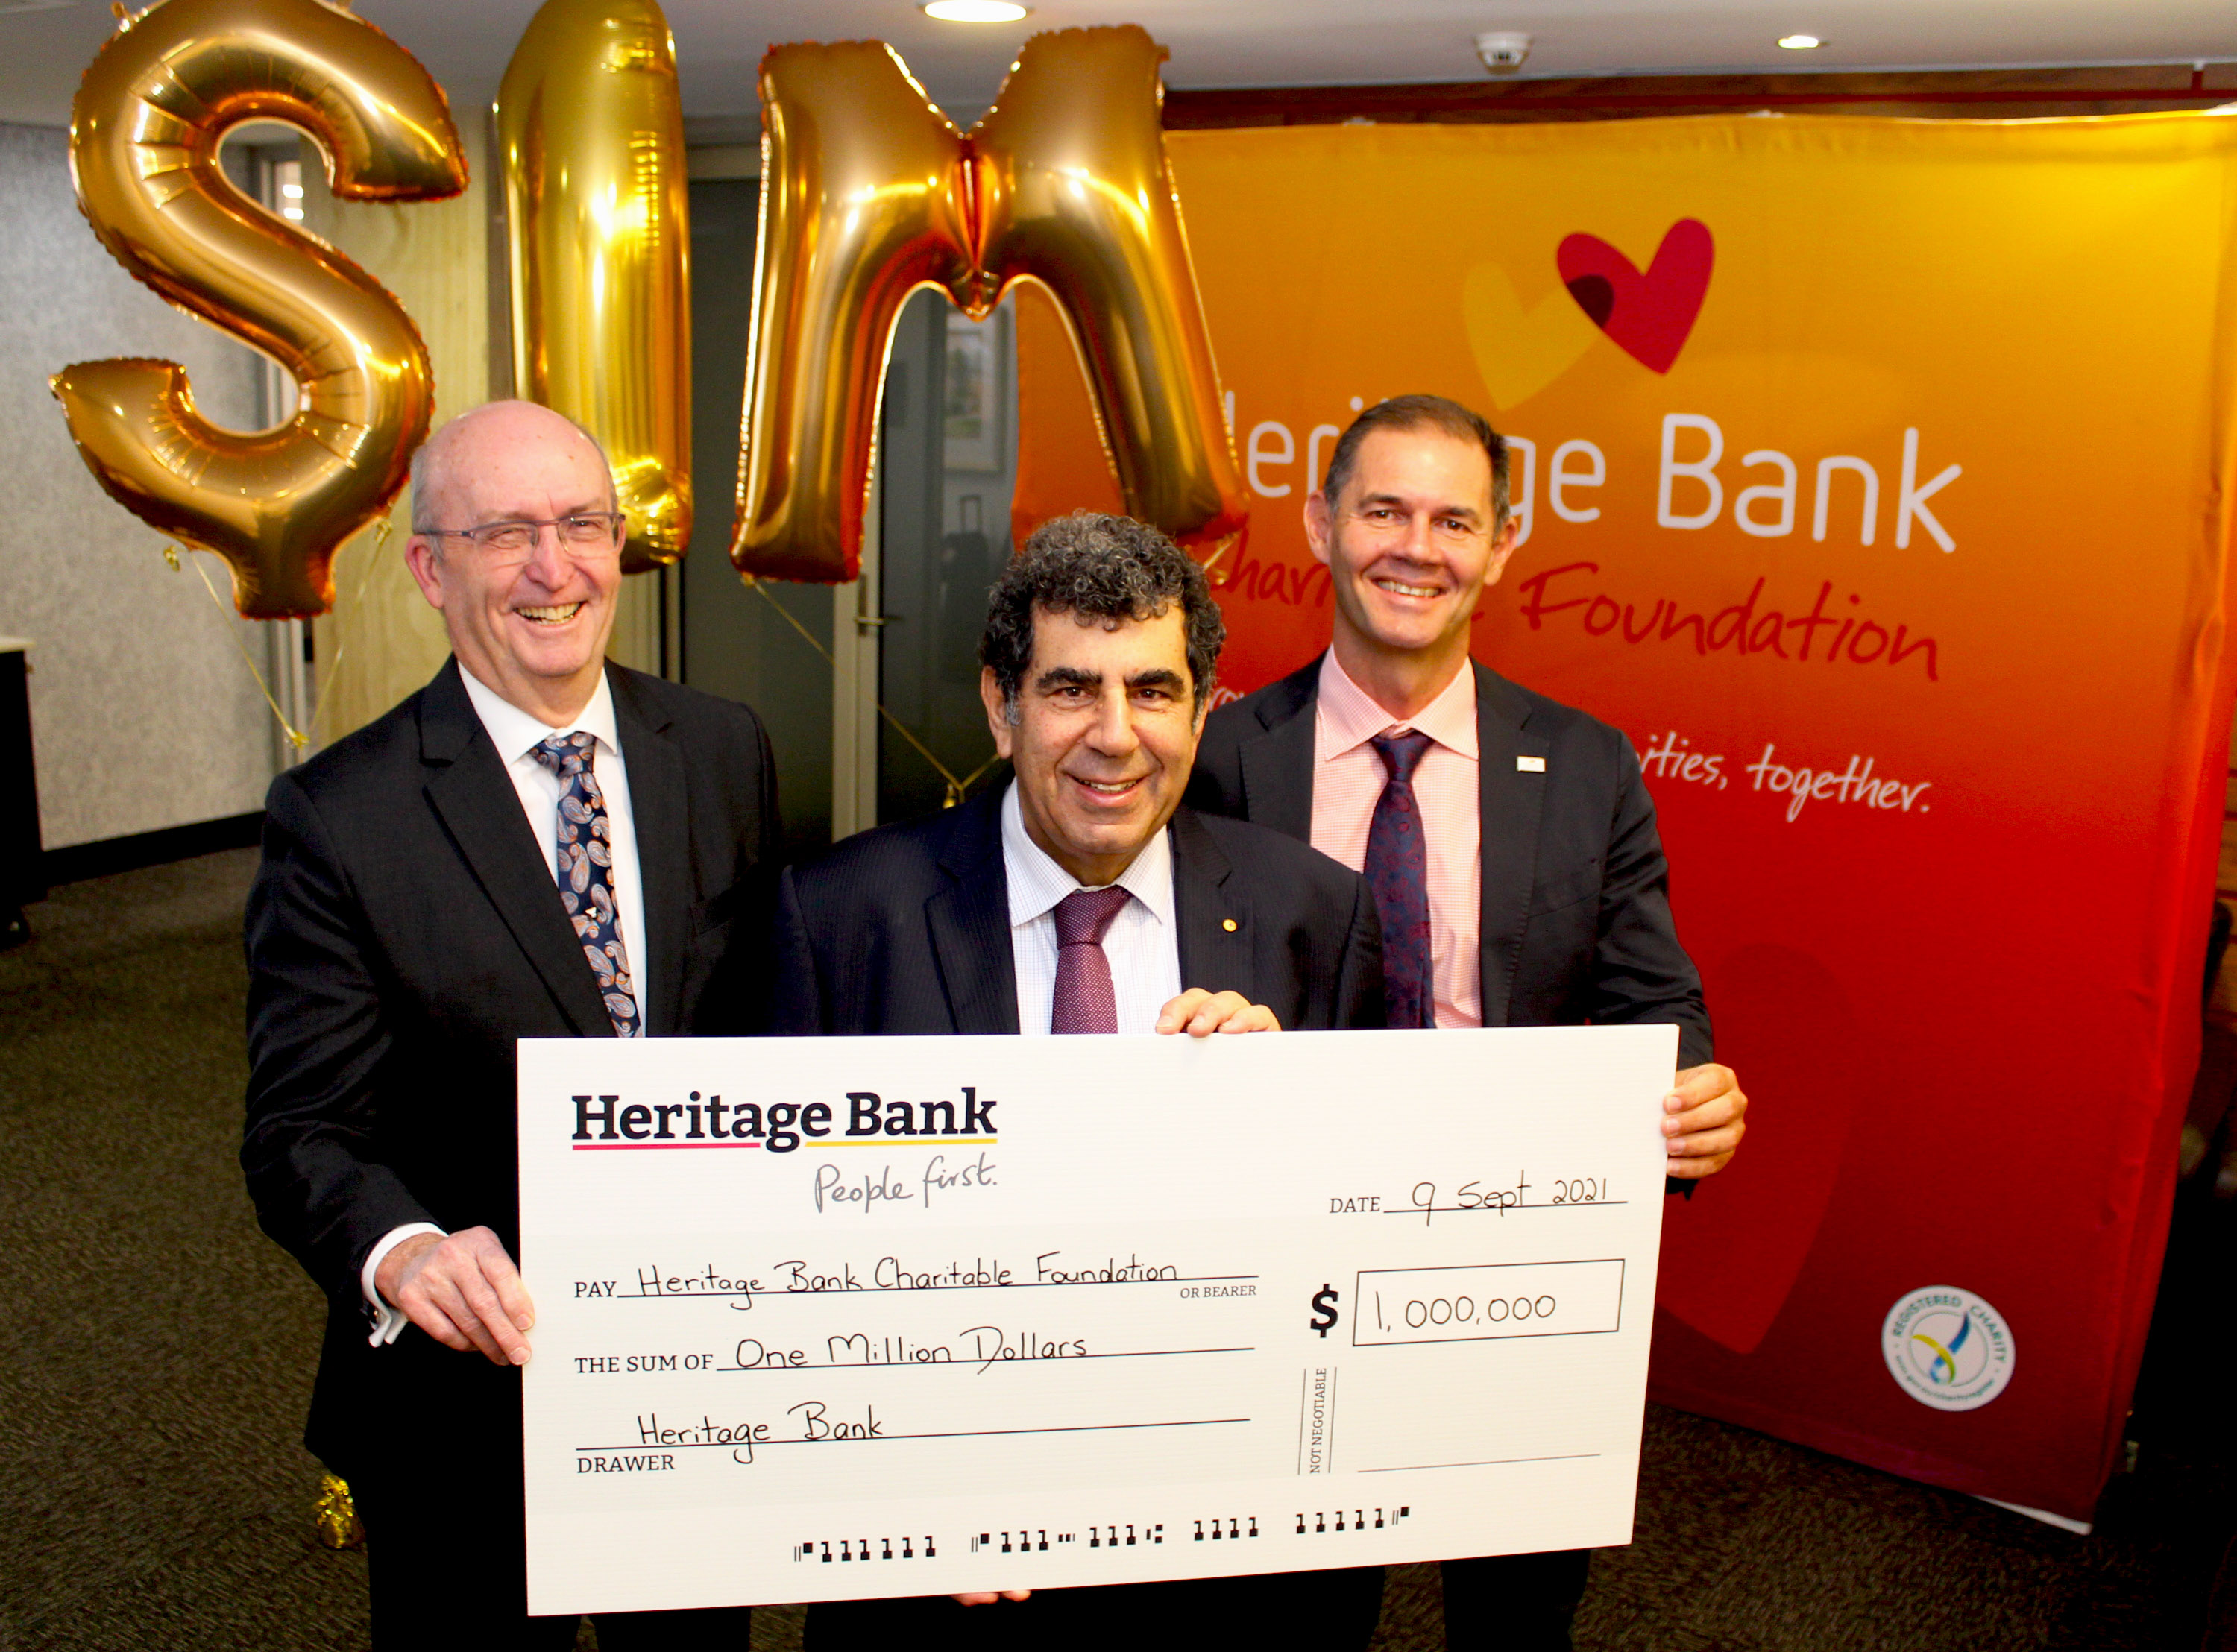 Heritage Bank makes $1 million donation to help people in need